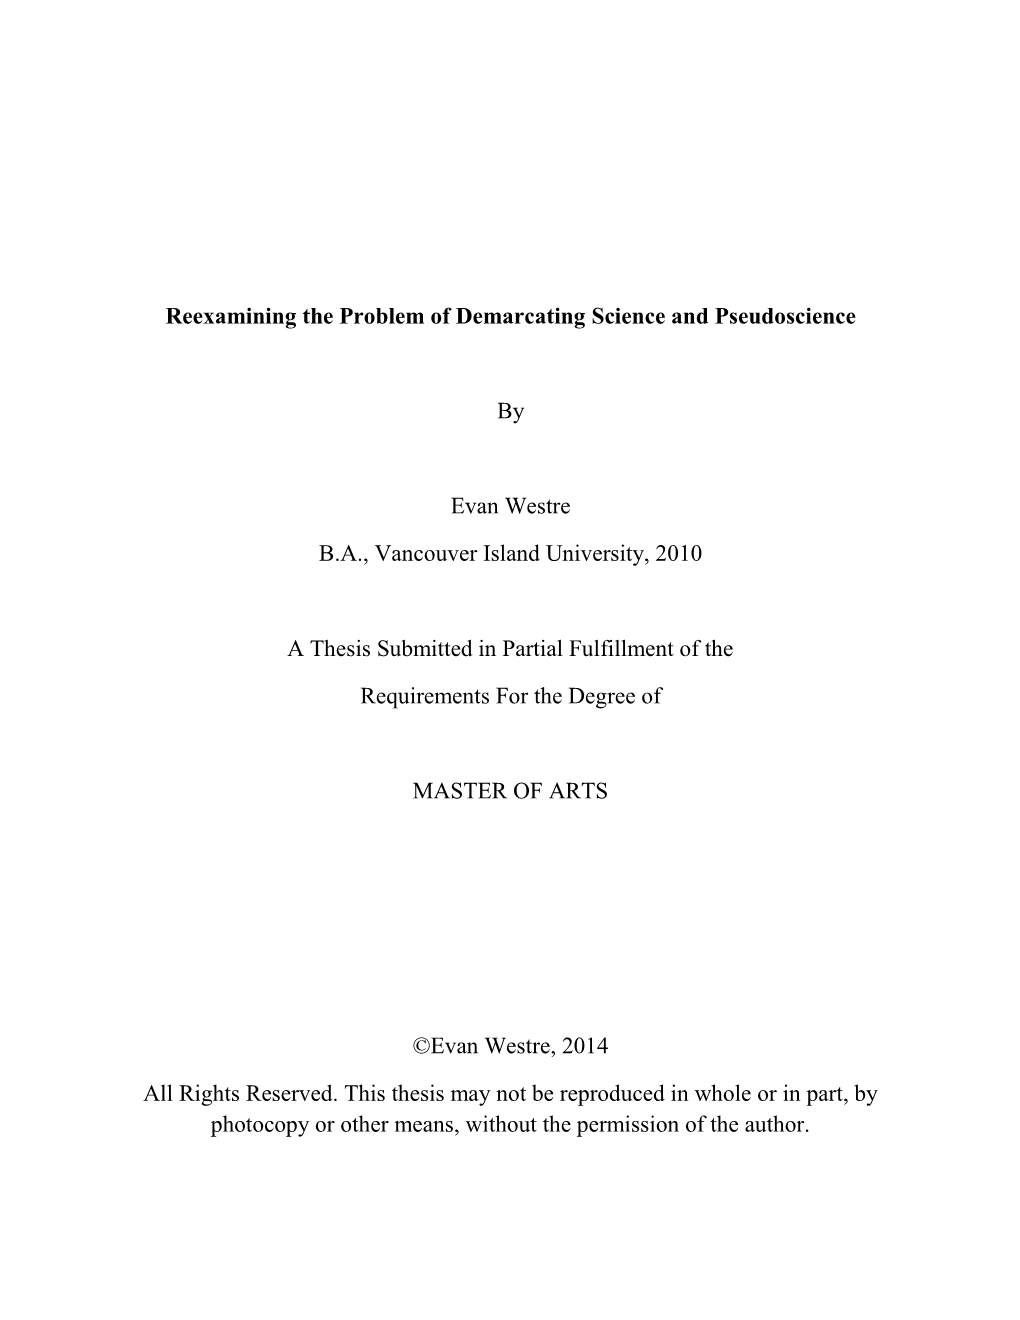 Reexamining the Problem of Demarcating Science and Pseudoscience by Evan Westre B.A., Vancouver Island University, 2010 a Thesis